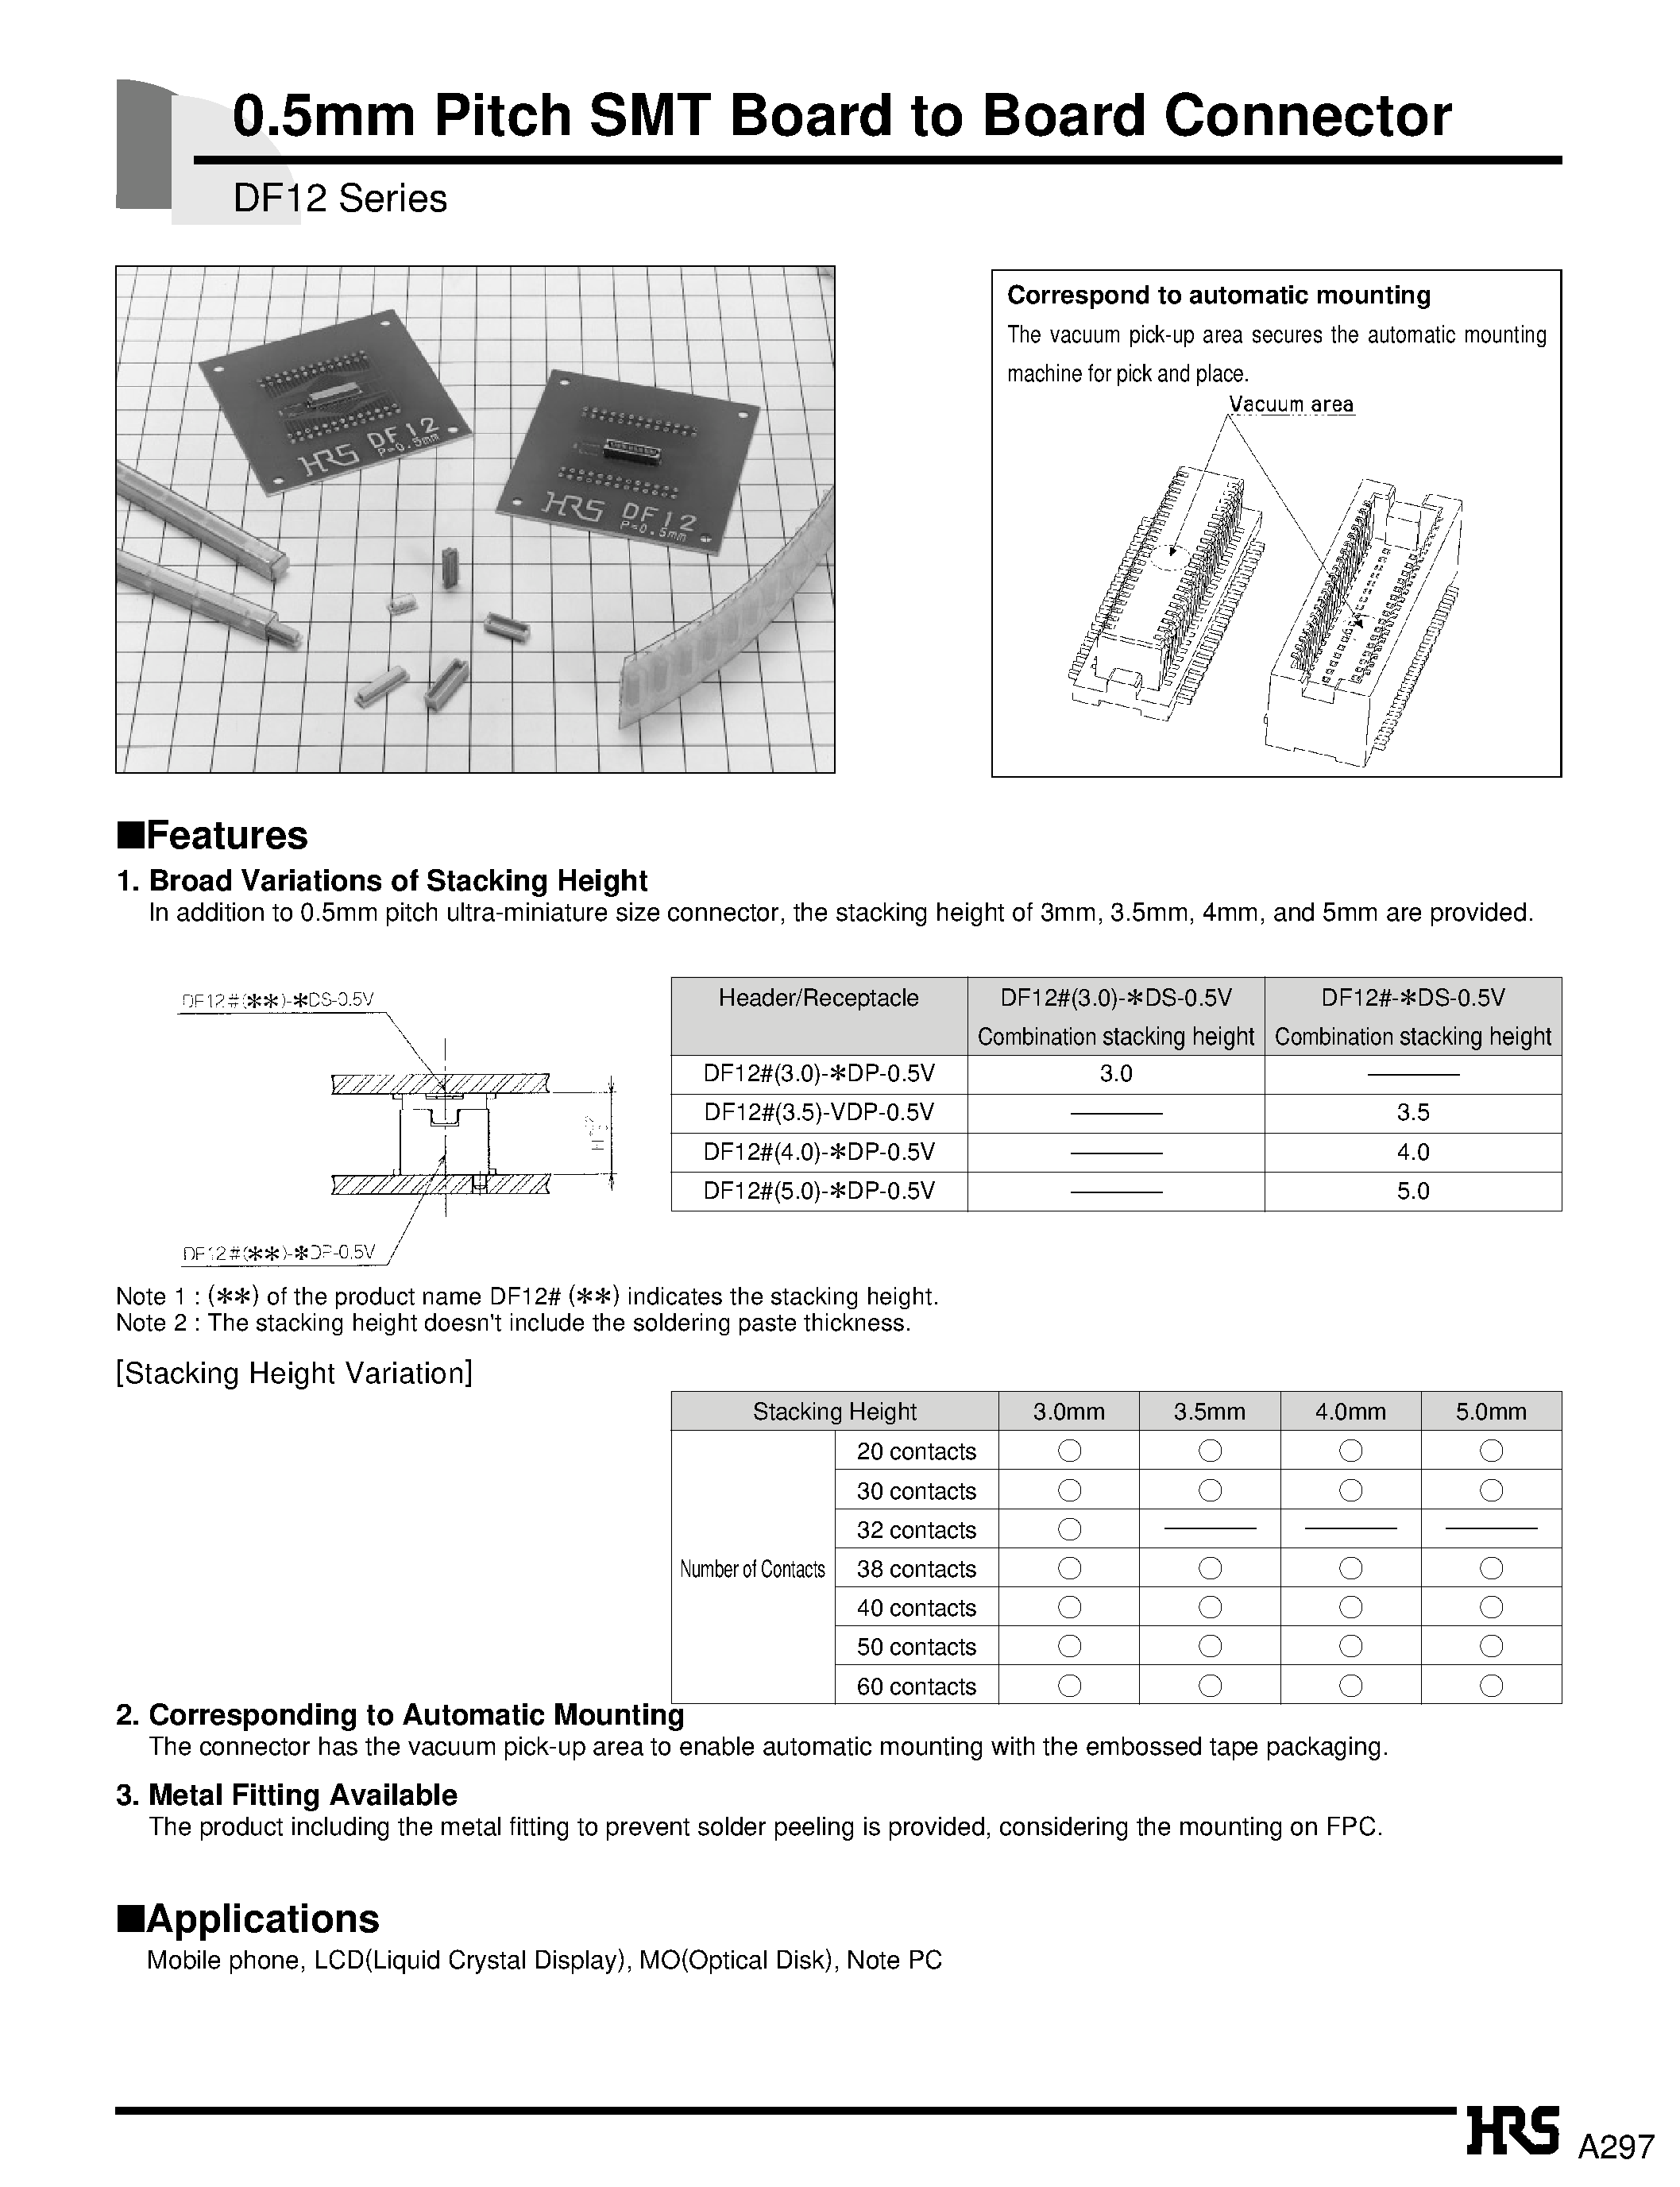 Datasheet DF12A-40DP-0.5V - 0.5mm Pitch SMT Board to Board Connector page 1